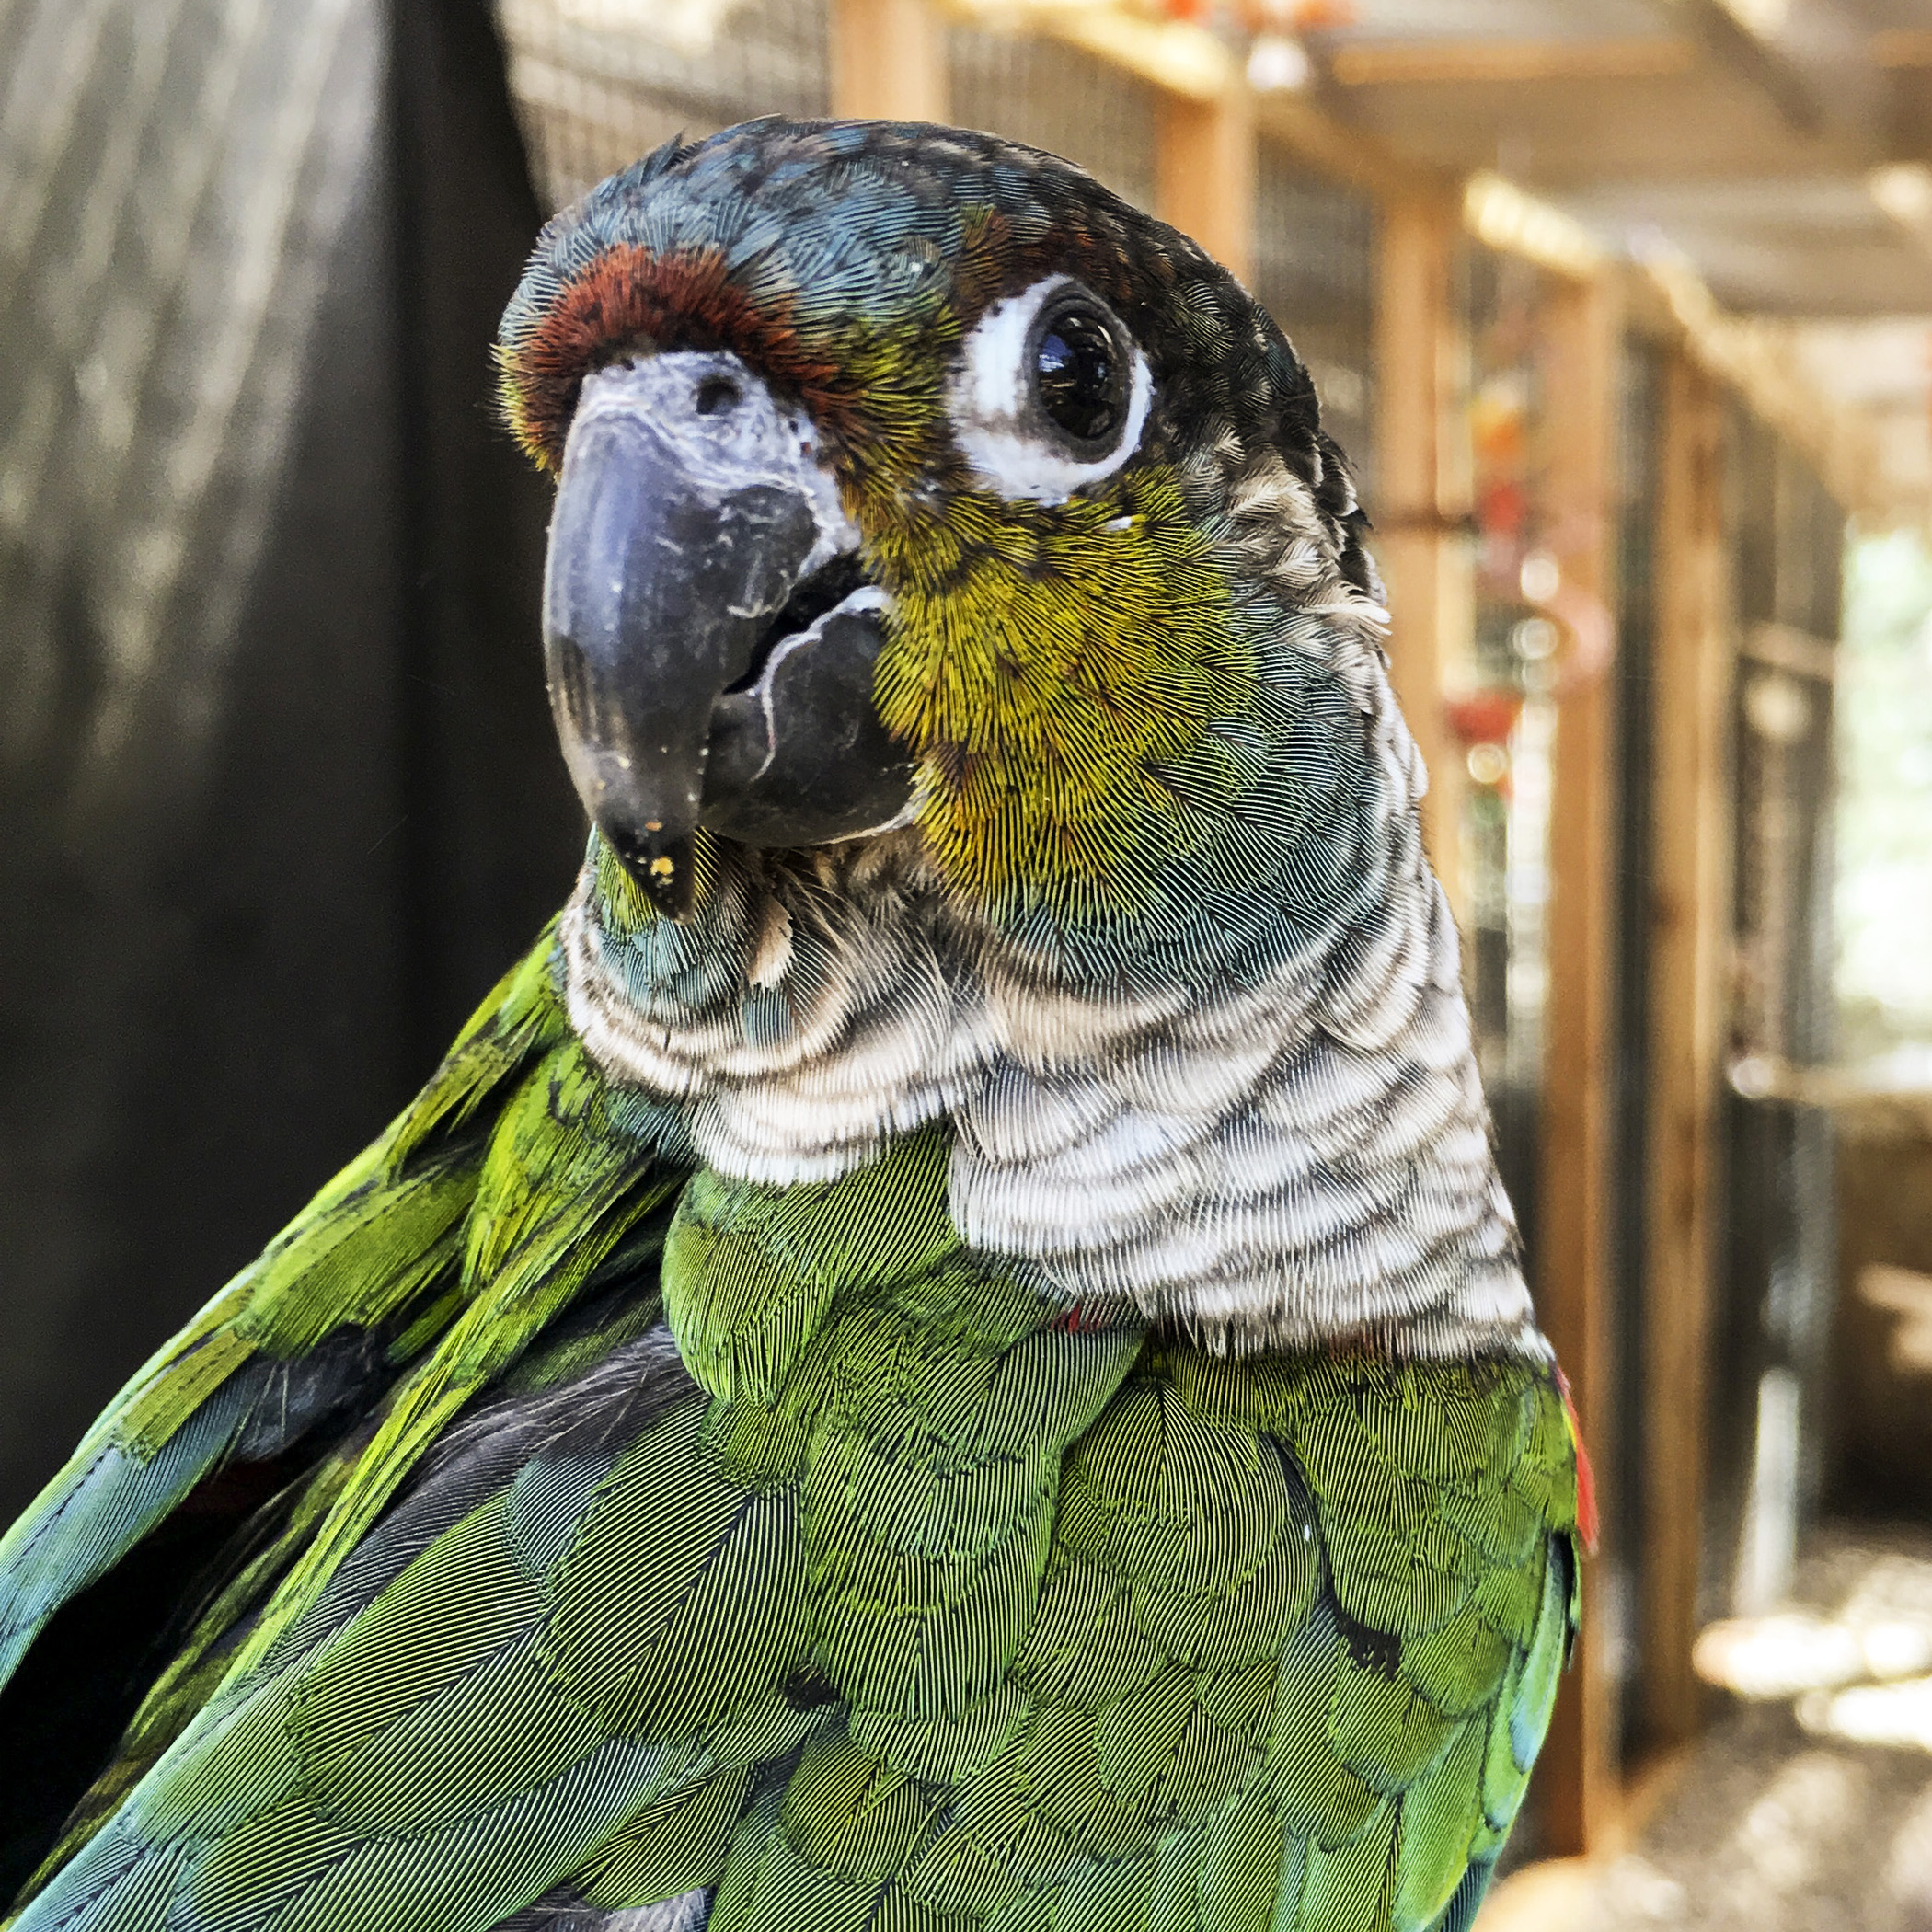  Parrots are wild by nature. They are not domesticated animals like cats and dogs, who have been selectively bred for suitable “pet qualities” for quite some time. Whether captured in the wild, or bred in captivity, parrots are at most only a few gen